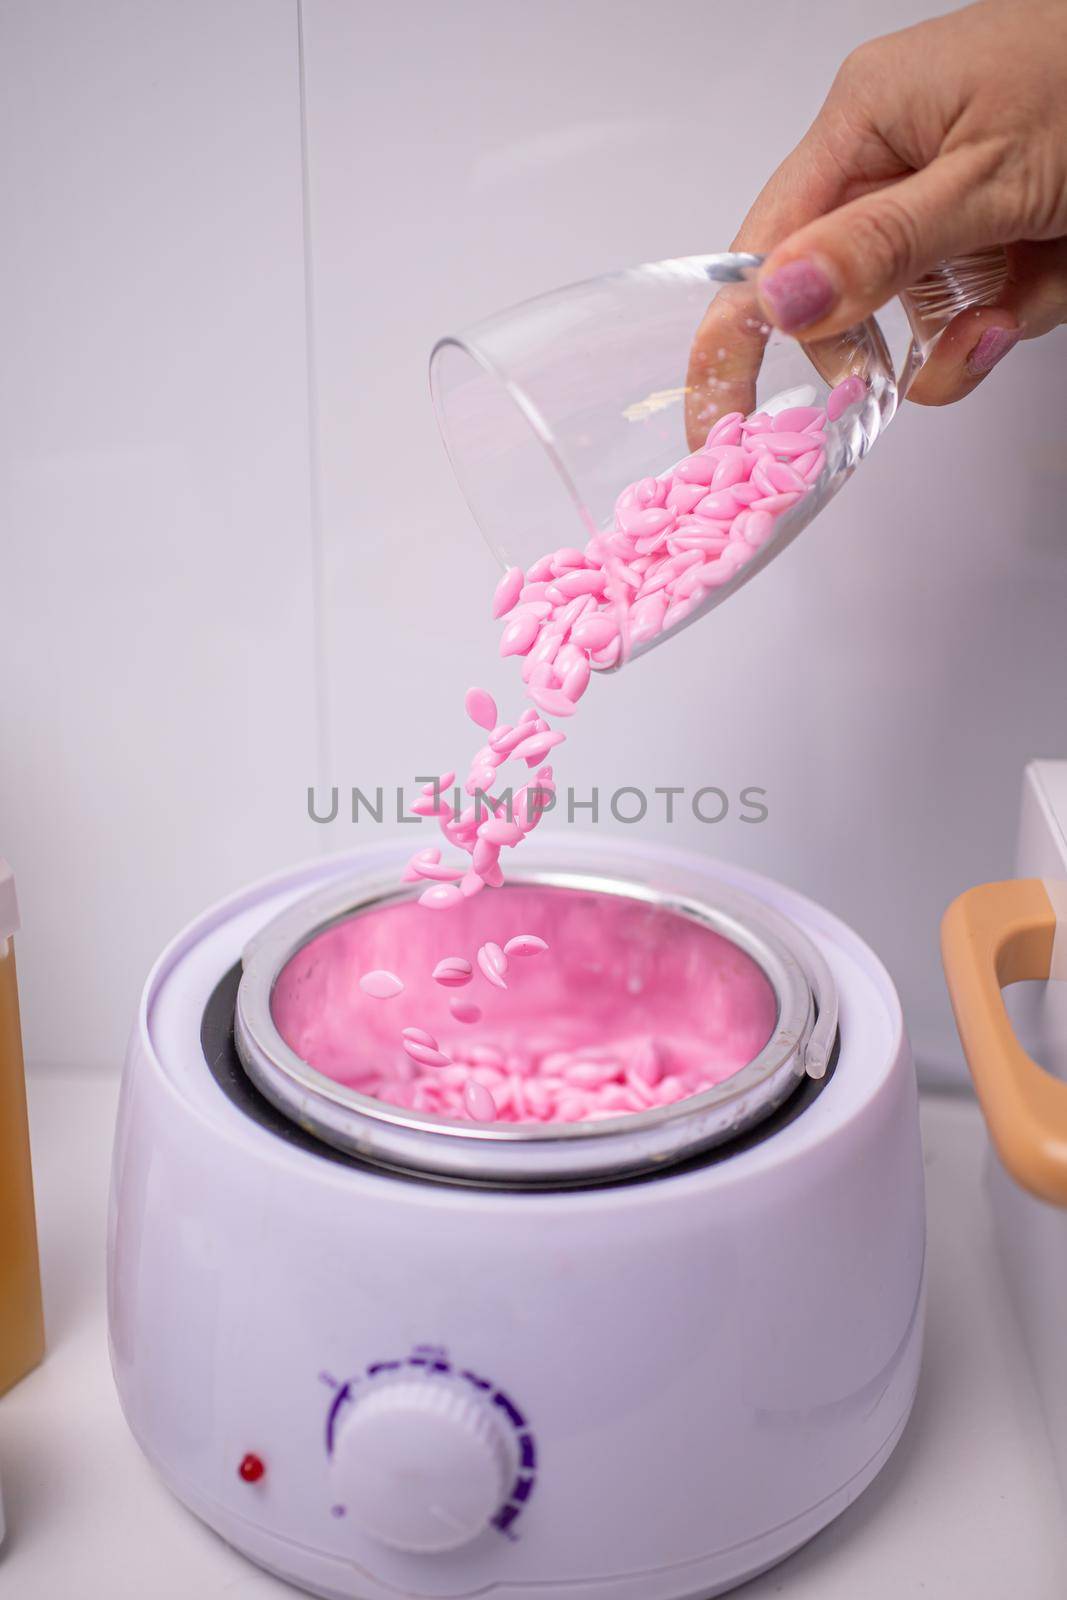 preparation of wax for work. from a glass glass in the hand, wax granules are poured into the heating device